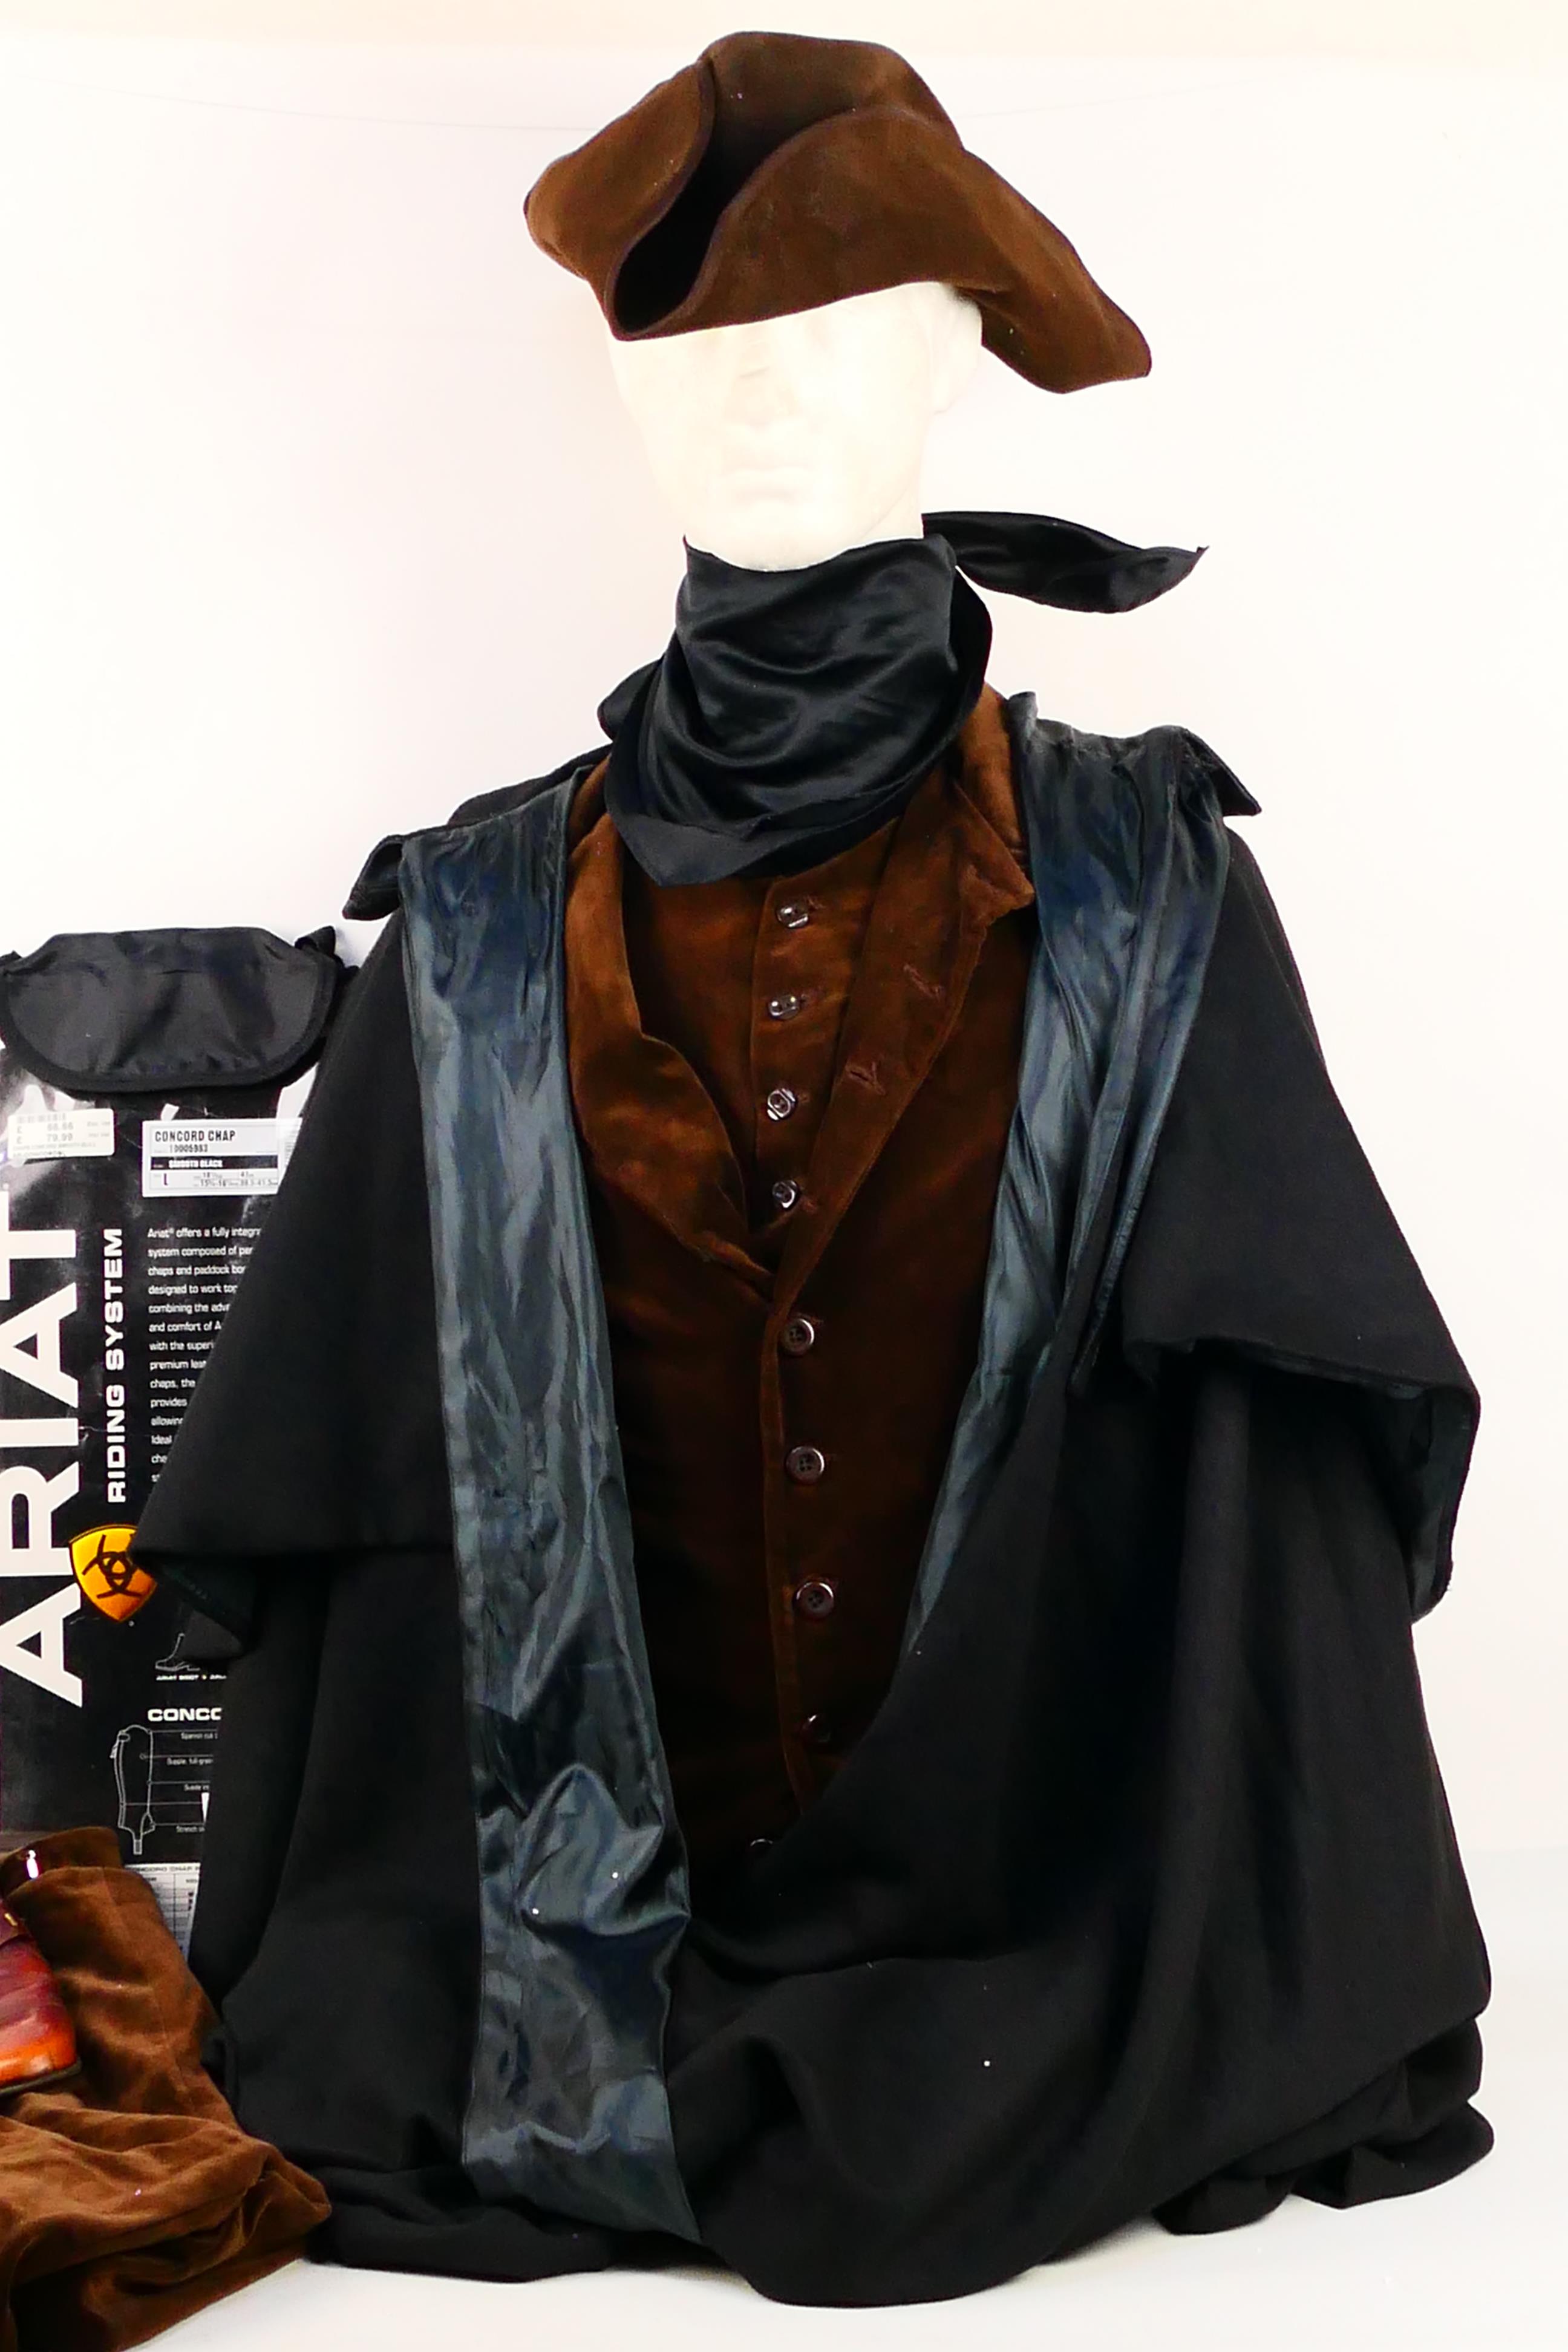 Theatrical Costume - An 18th century style highwayman / Dick Turpin costume comprising trousers, - Image 2 of 25